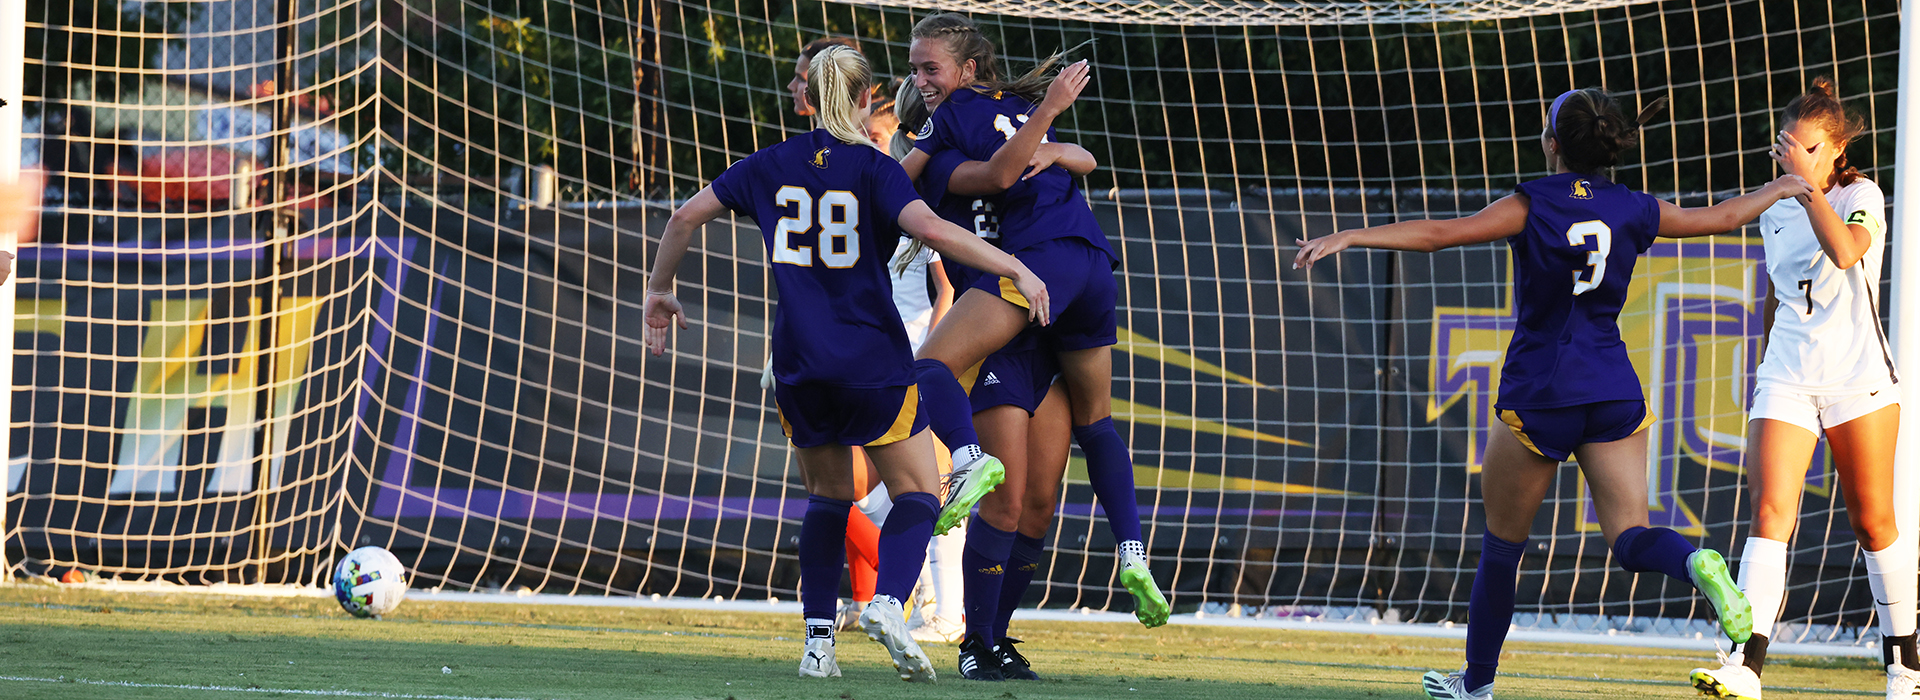 Golden Eagles pick up 1-1 draw against in-state rival ETSU